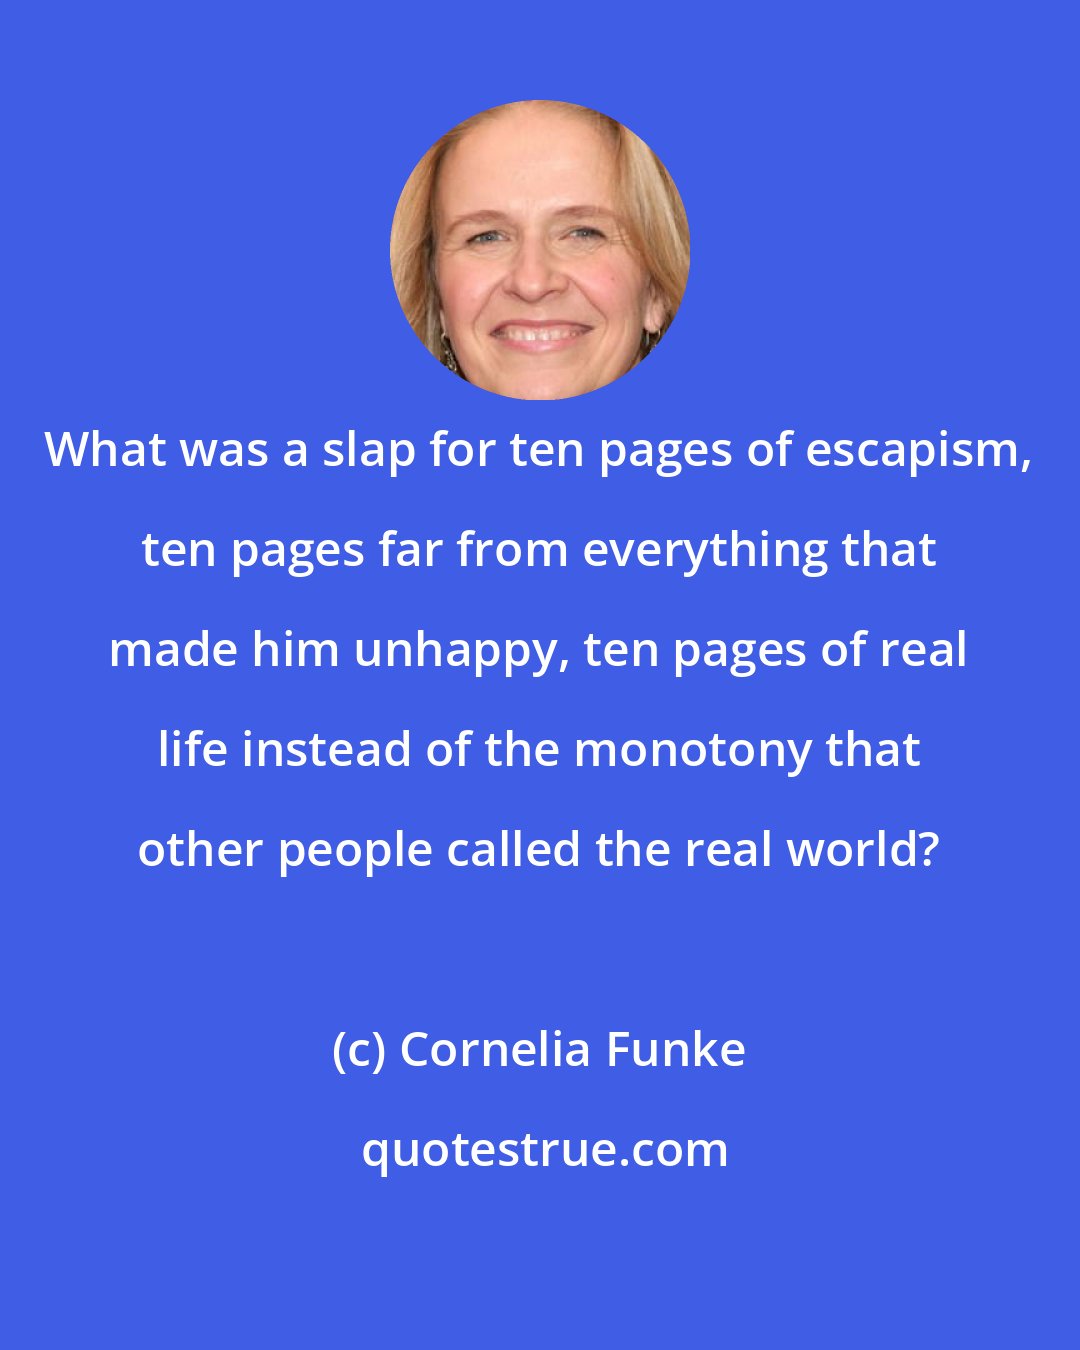 Cornelia Funke: What was a slap for ten pages of escapism, ten pages far from everything that made him unhappy, ten pages of real life instead of the monotony that other people called the real world?